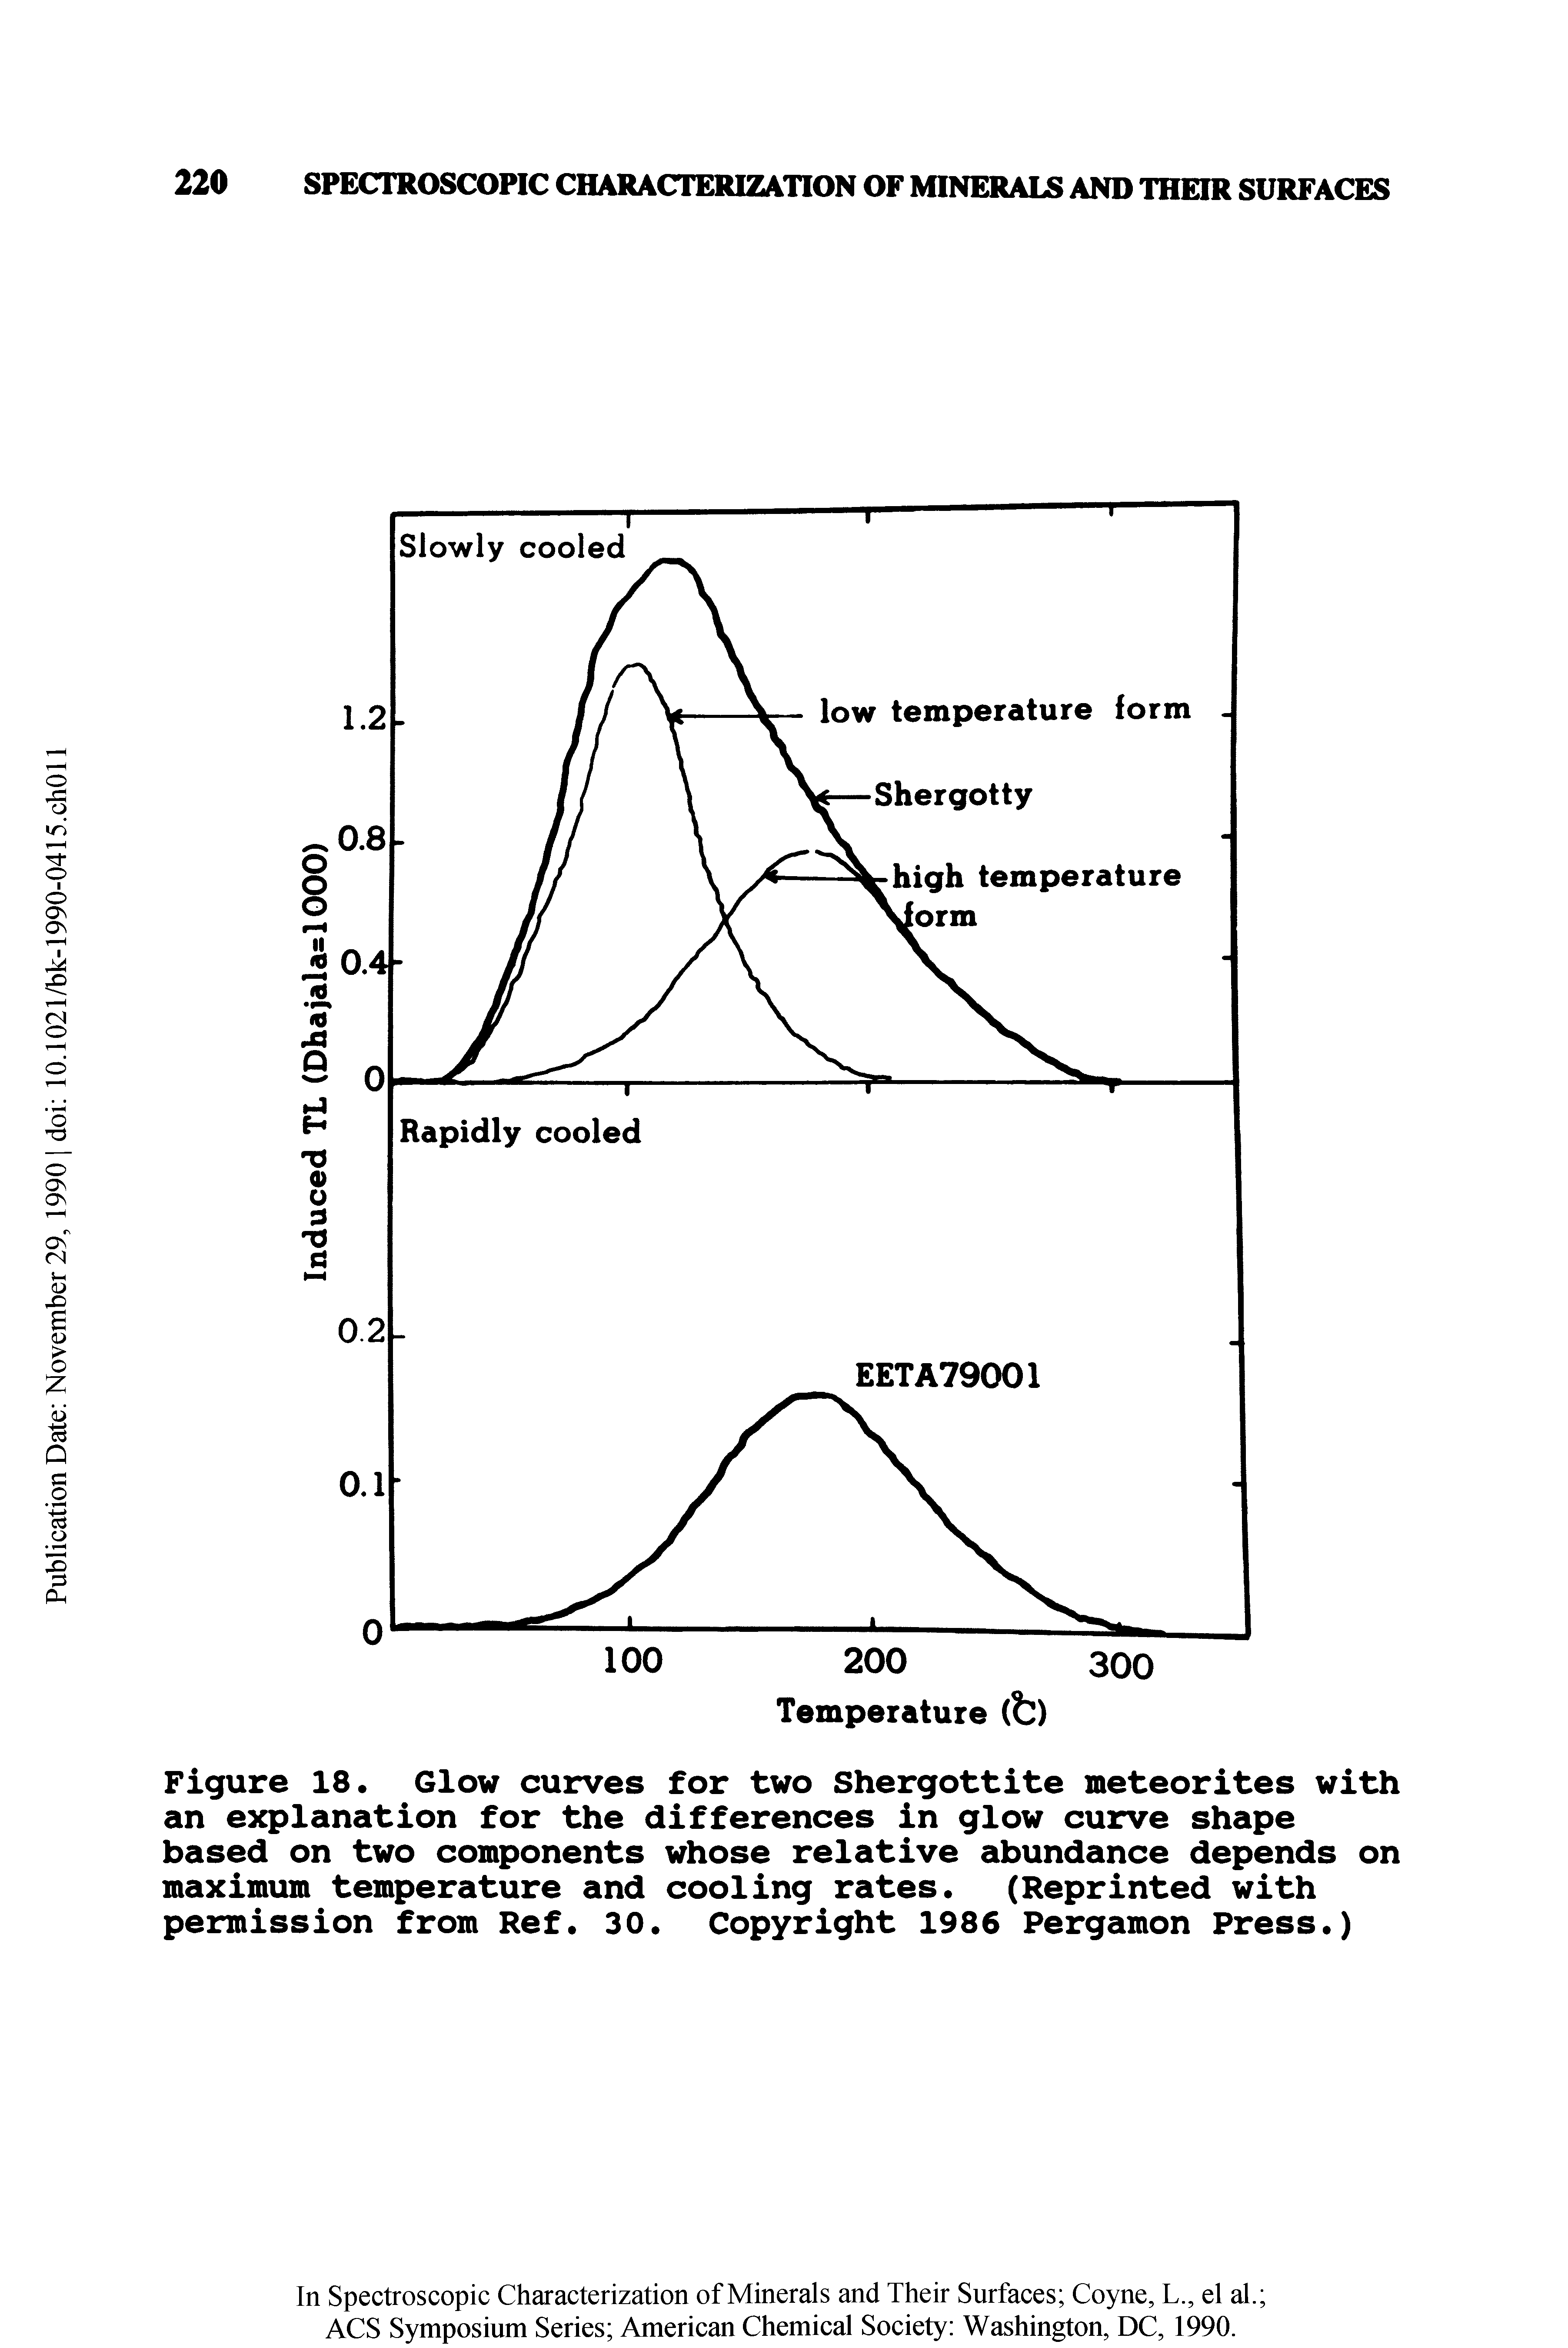 Figure 18. Glow curves for two Shergottite meteorites with an explanation for the differences in glow curve shape based on two components whose relative abundance depends on maximum temperature and cooling rates. (Reprinted with permission from Ref. 30. Copyright 1986 Pergamon Press.)...